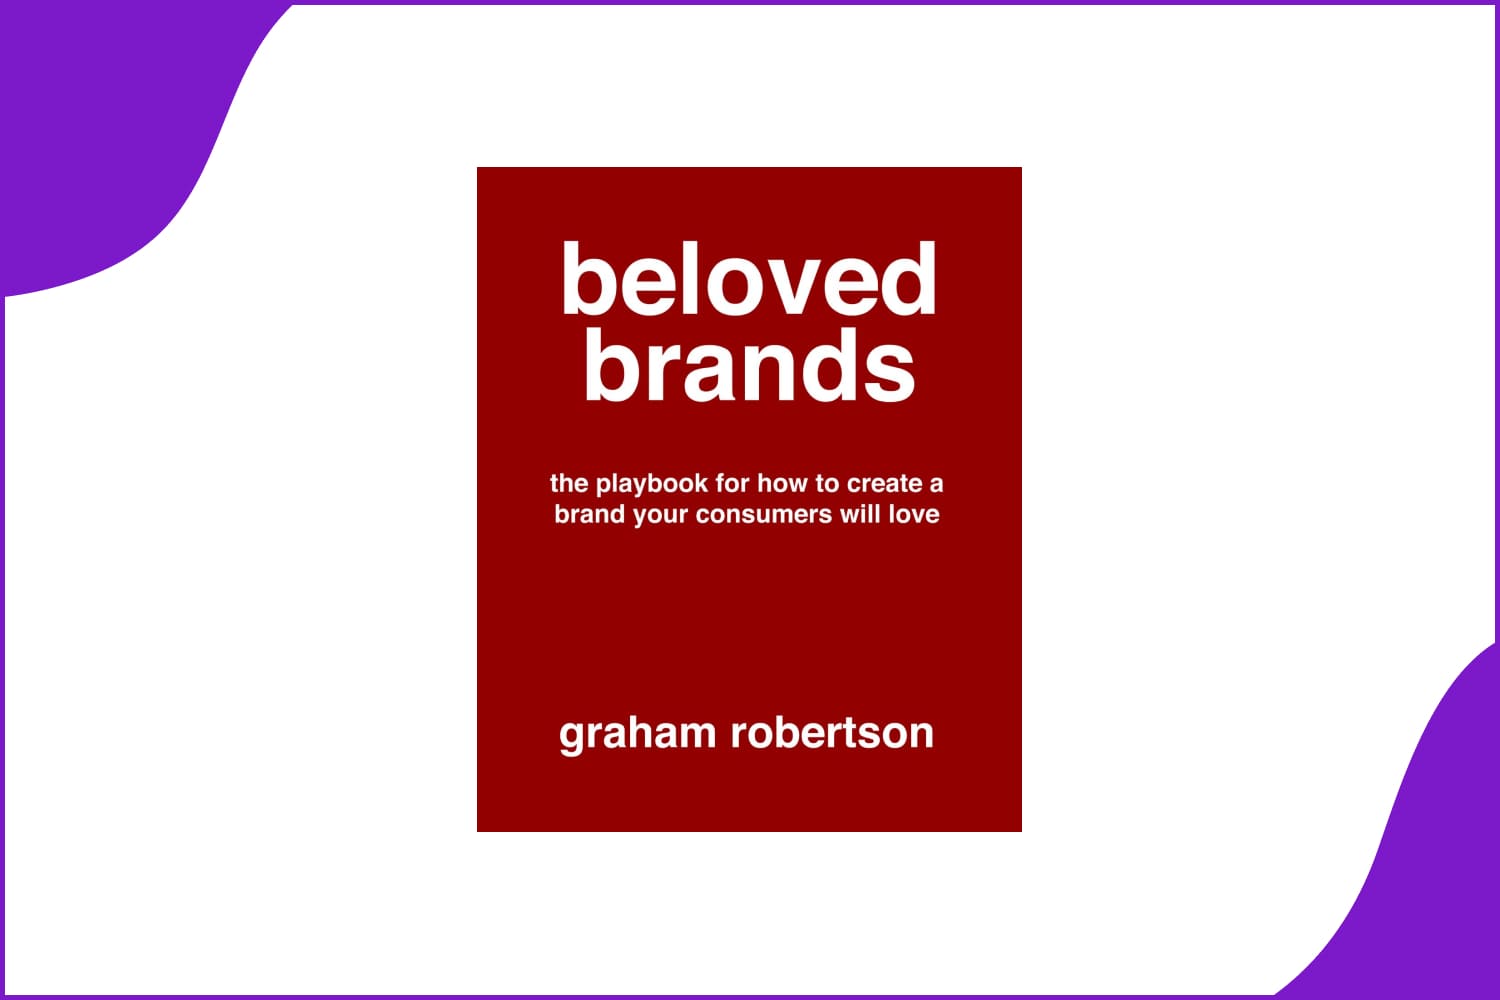 Beloved Brands: The playbook for how to build a brand your consumers will love by Mr Graham Robertson.